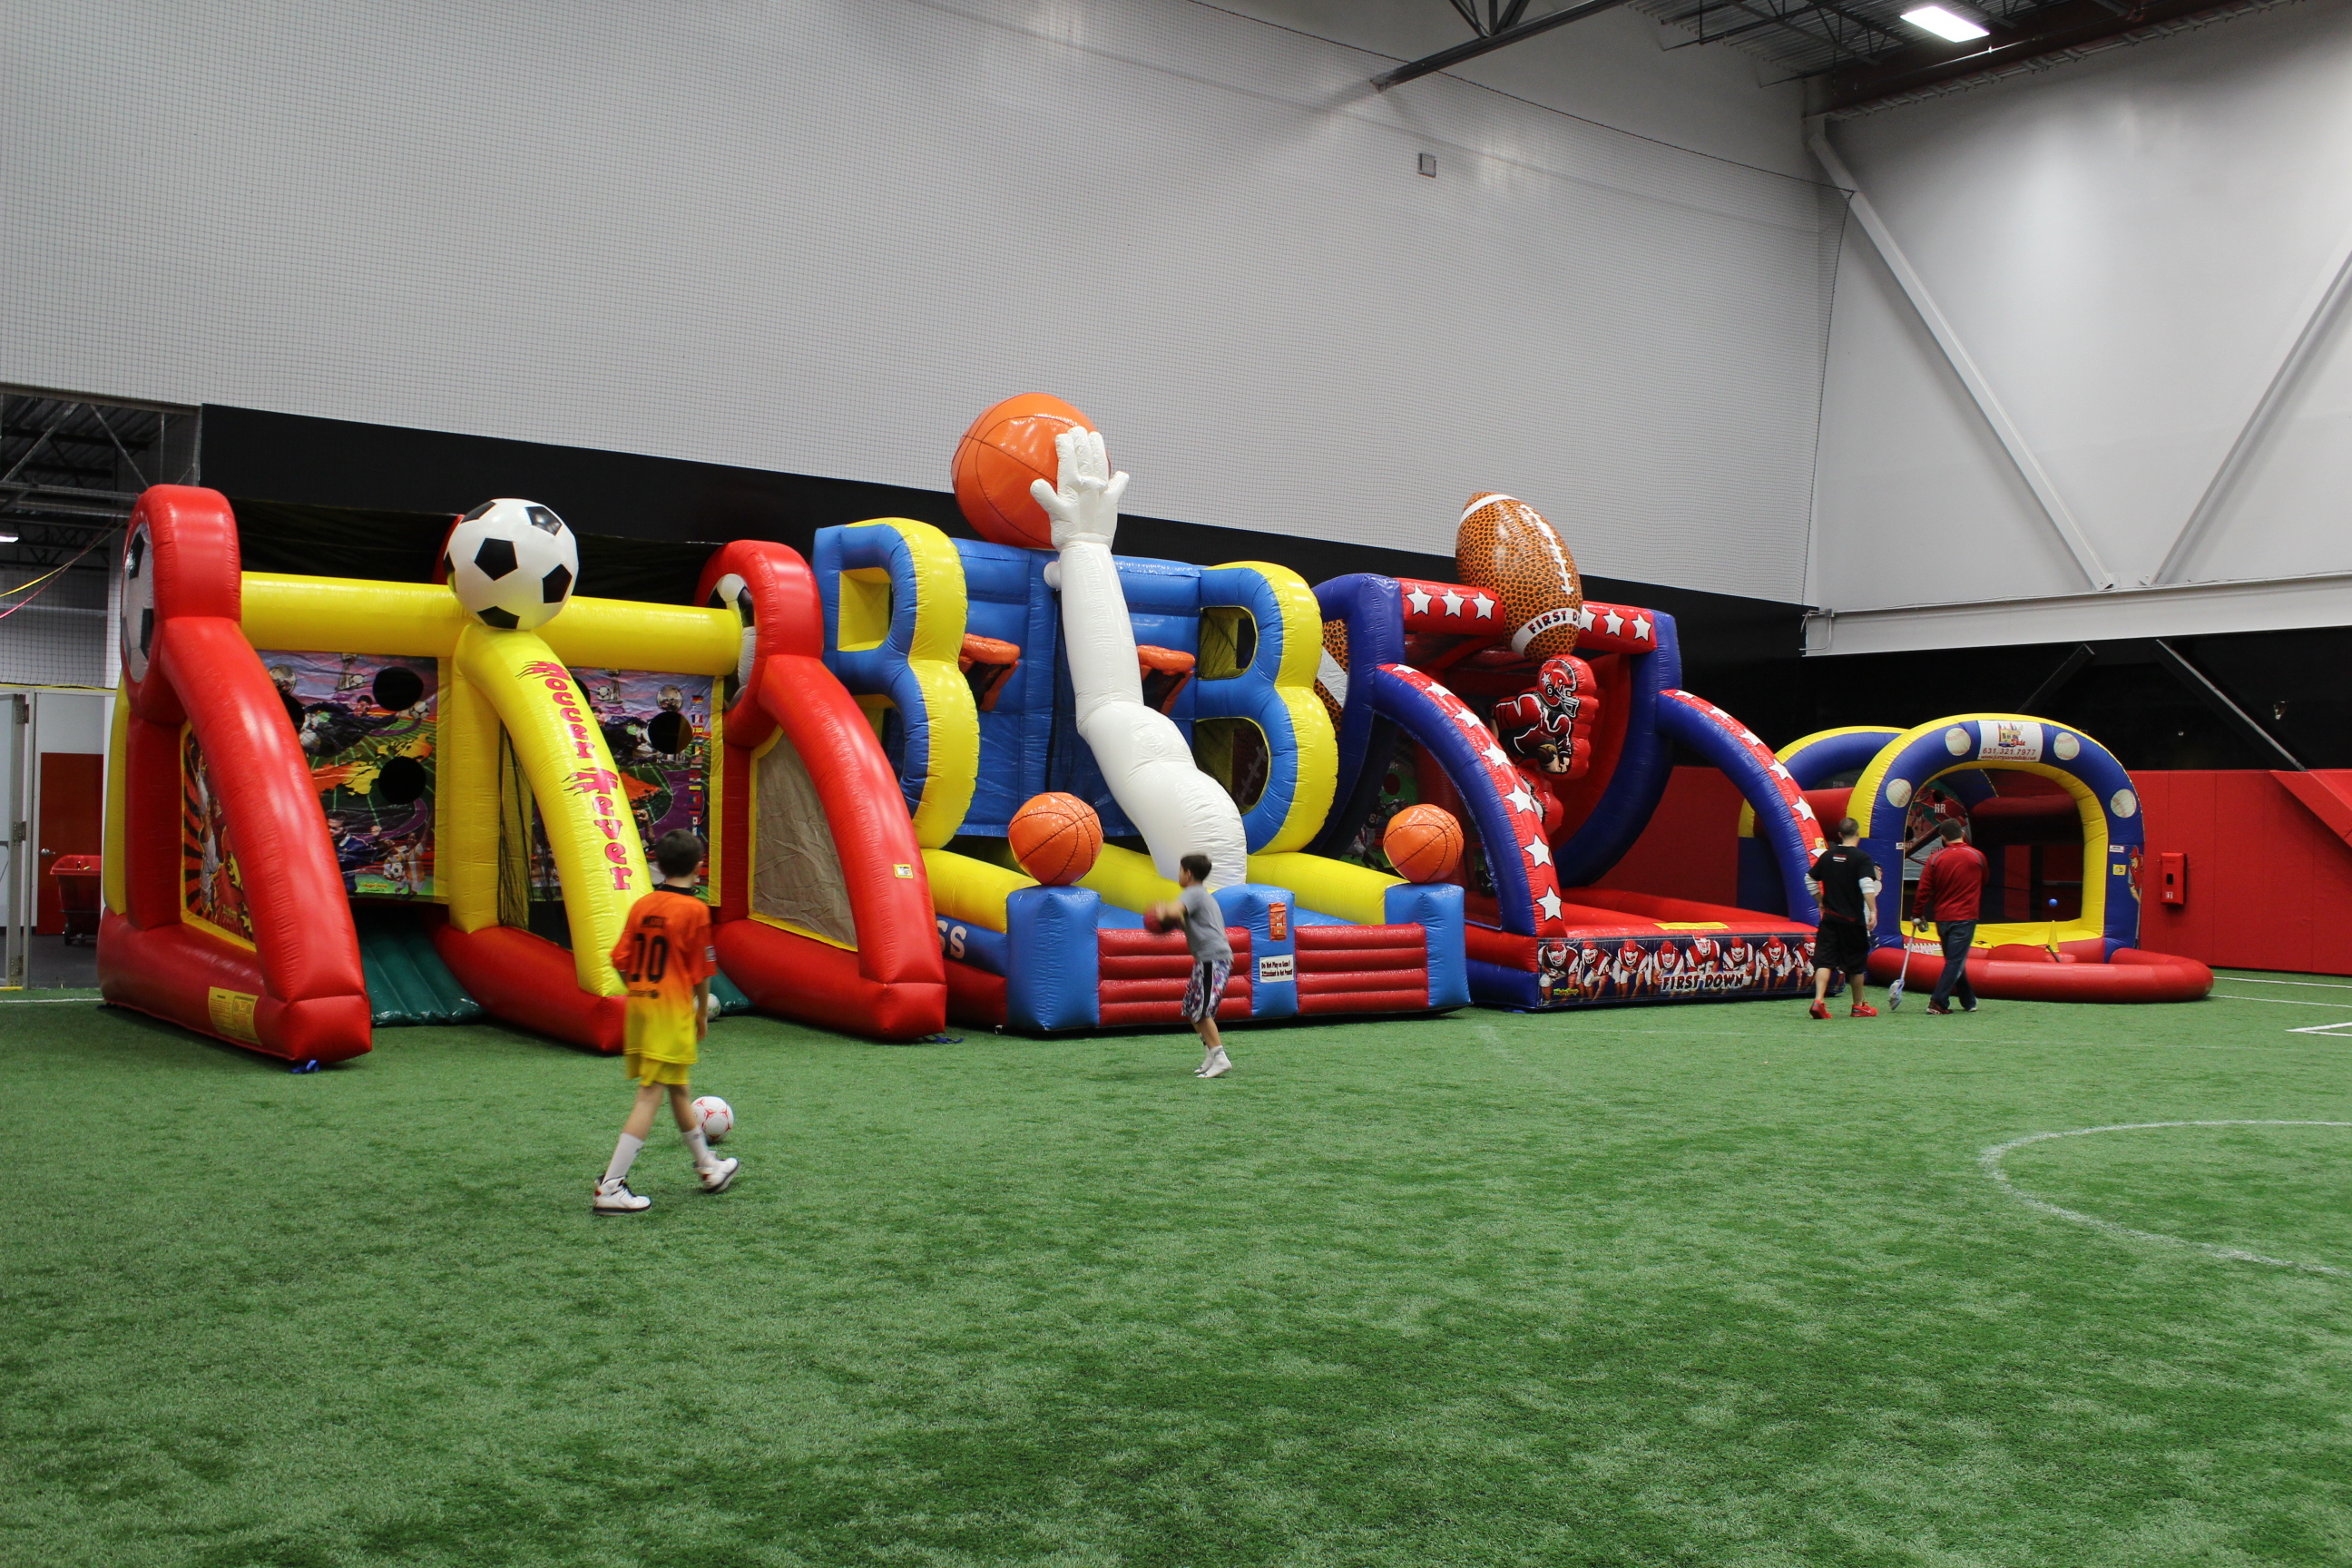 So many sport inflatable game rentals Long Island to choose from, Inflatable foot ball, inflatable baseball, inflatable soccer, inflatable soccer dartboard. Check out our big selection of bounce house rentals and the best party rentals around town including Southampton for party rentals